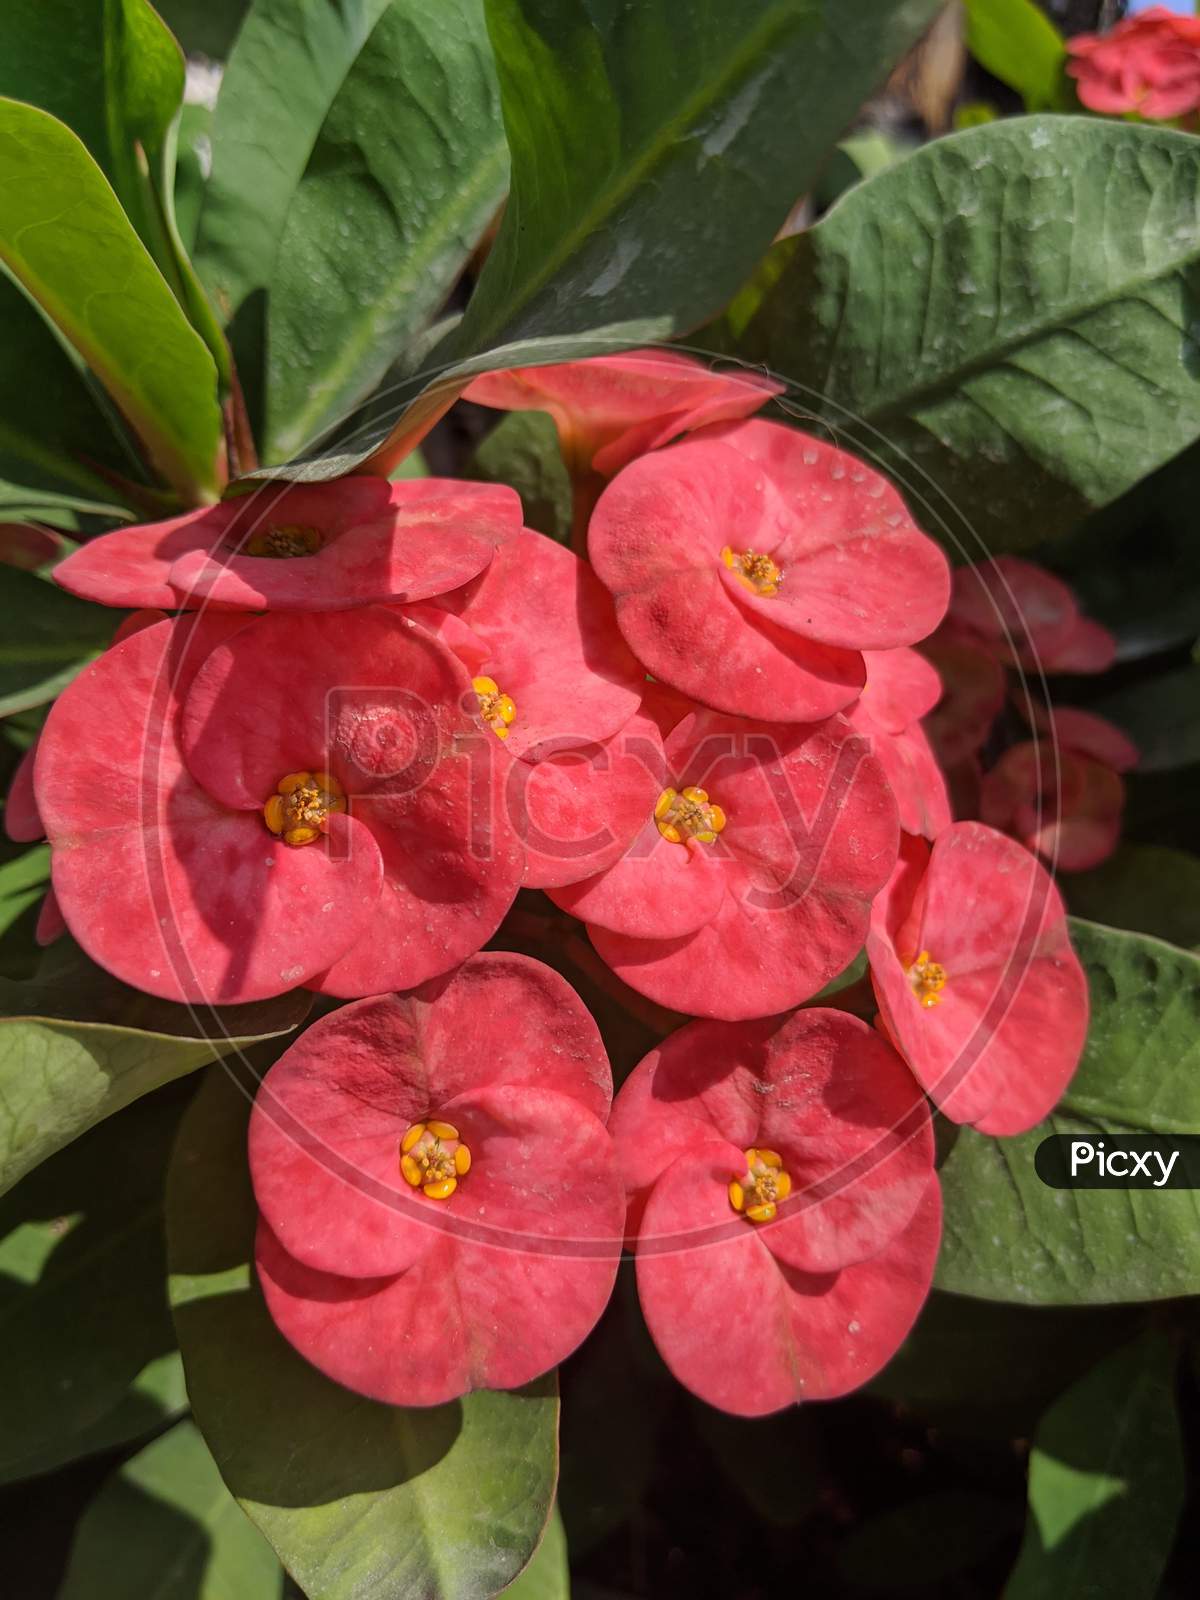 Red flower with two petals. Euphorbia millii. Crown of thorns plant.